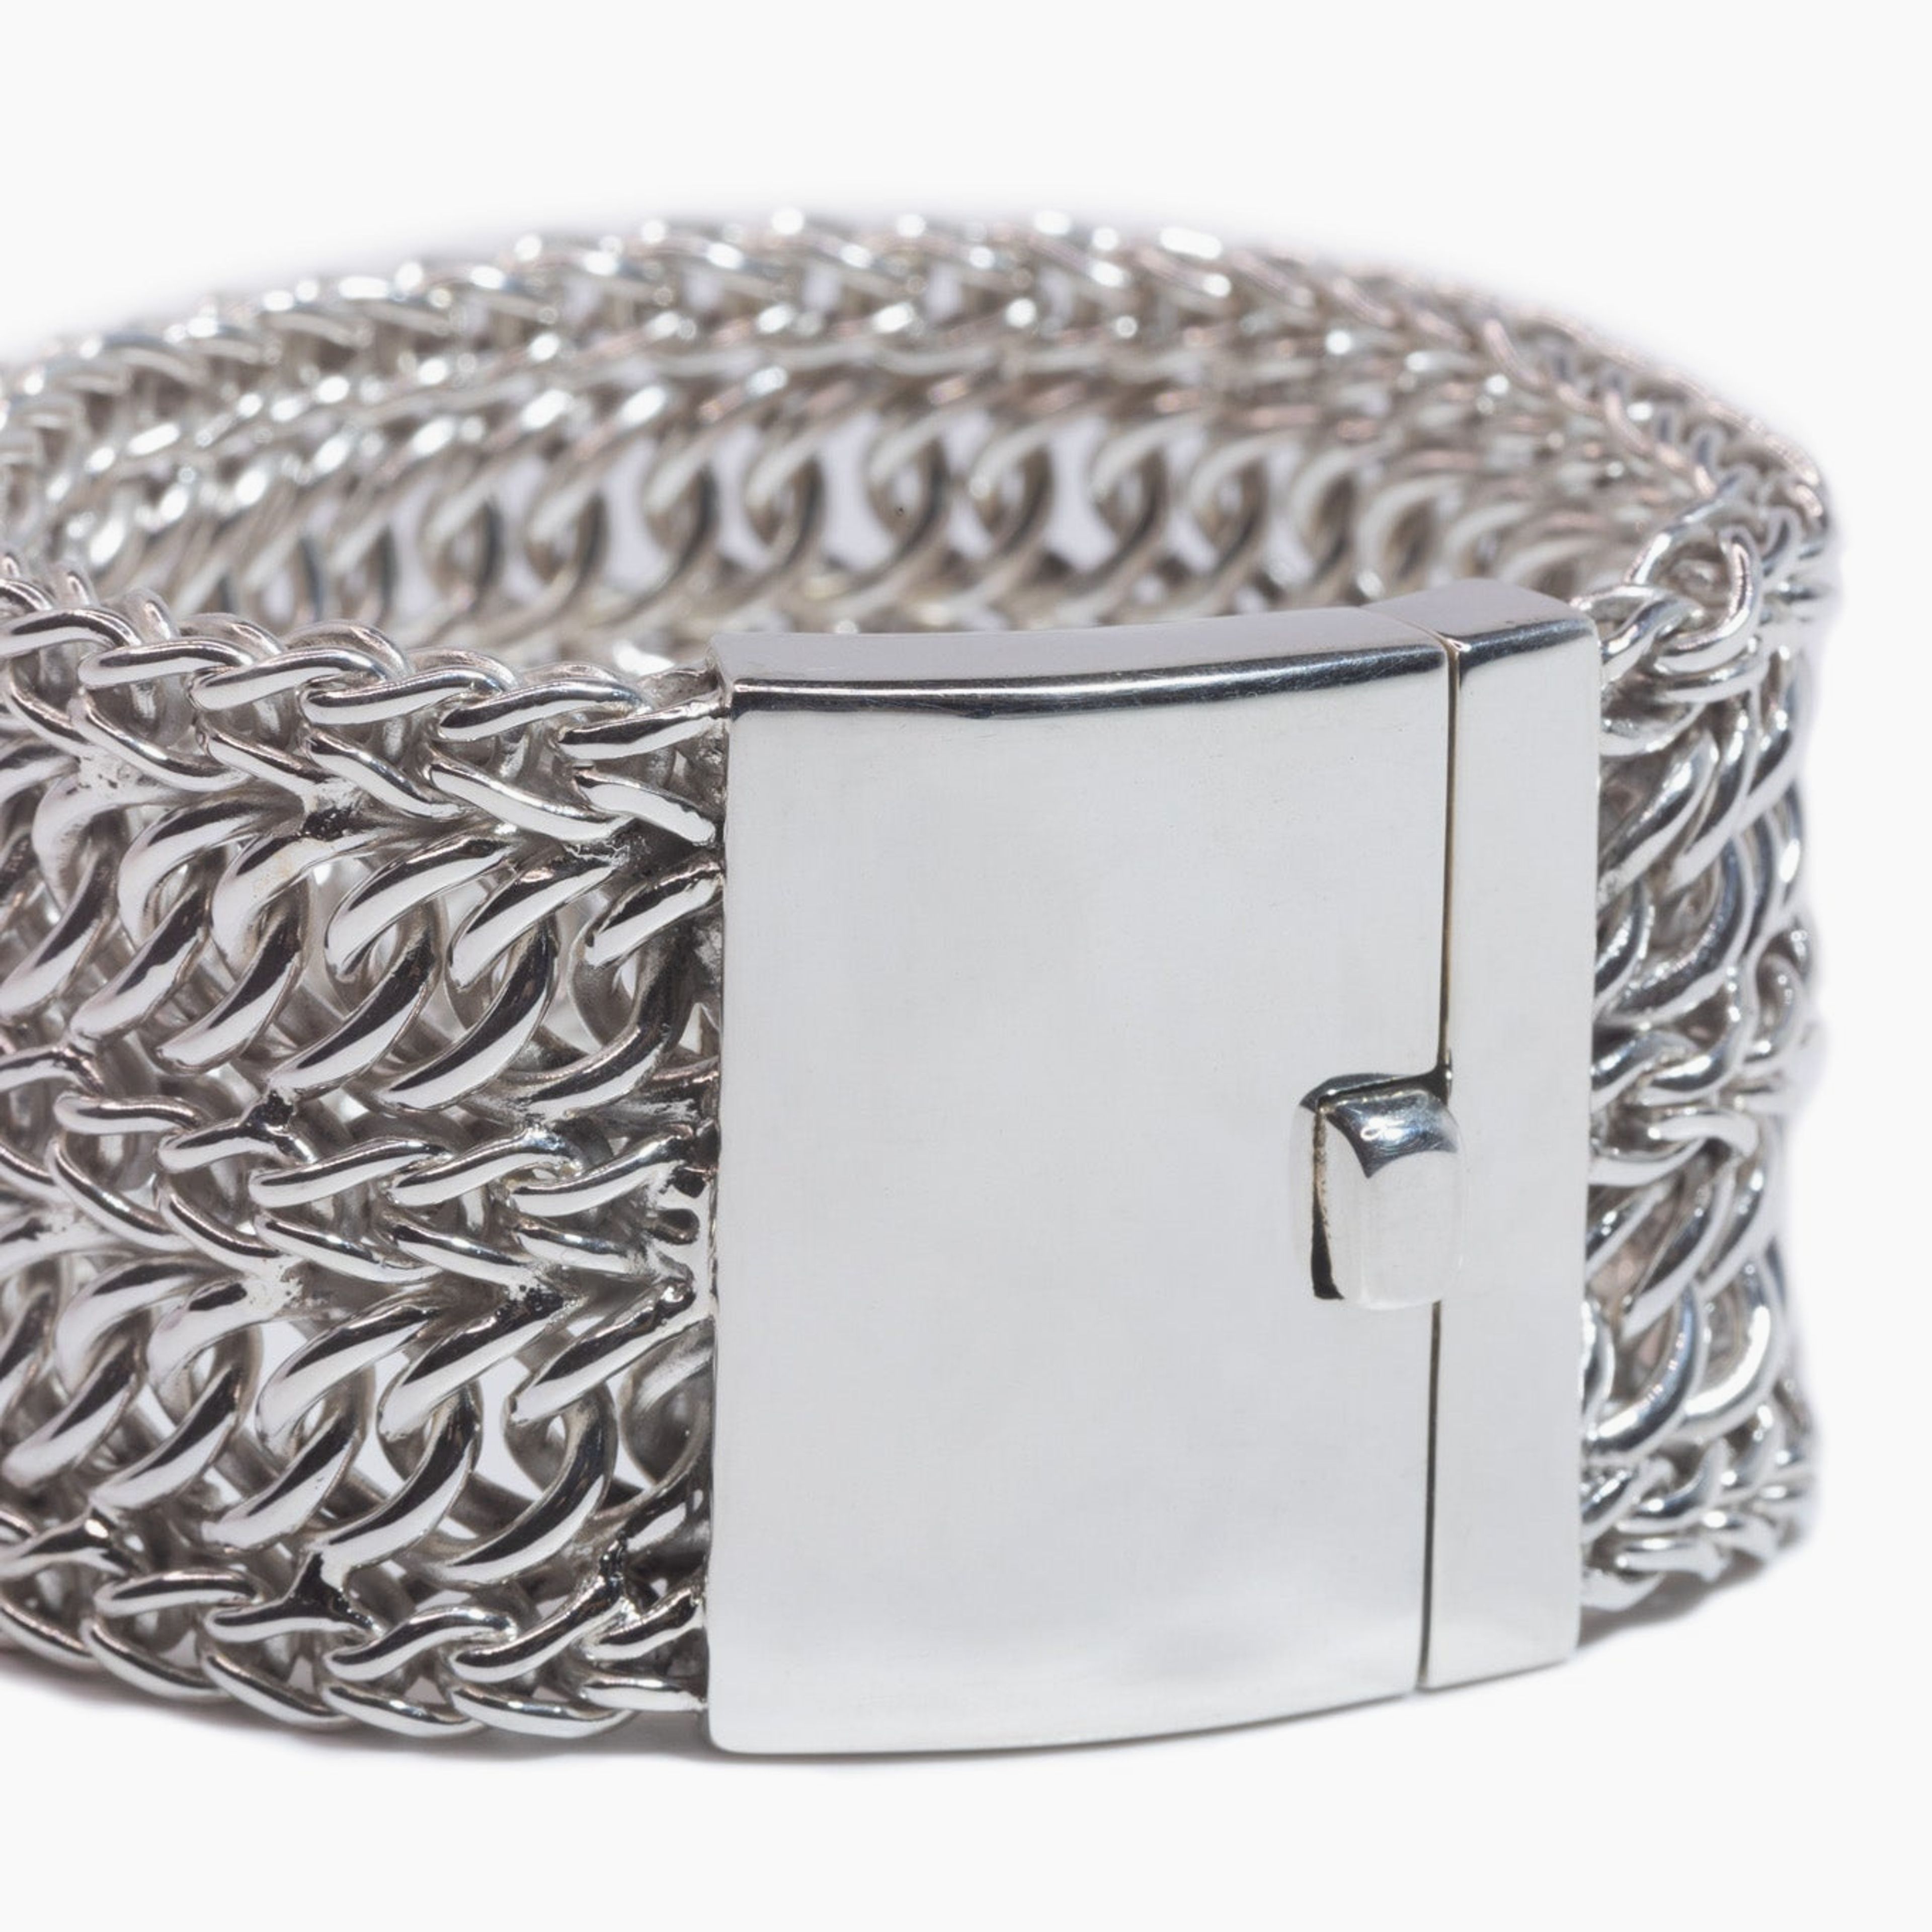 Woven Bracelet with Clasp